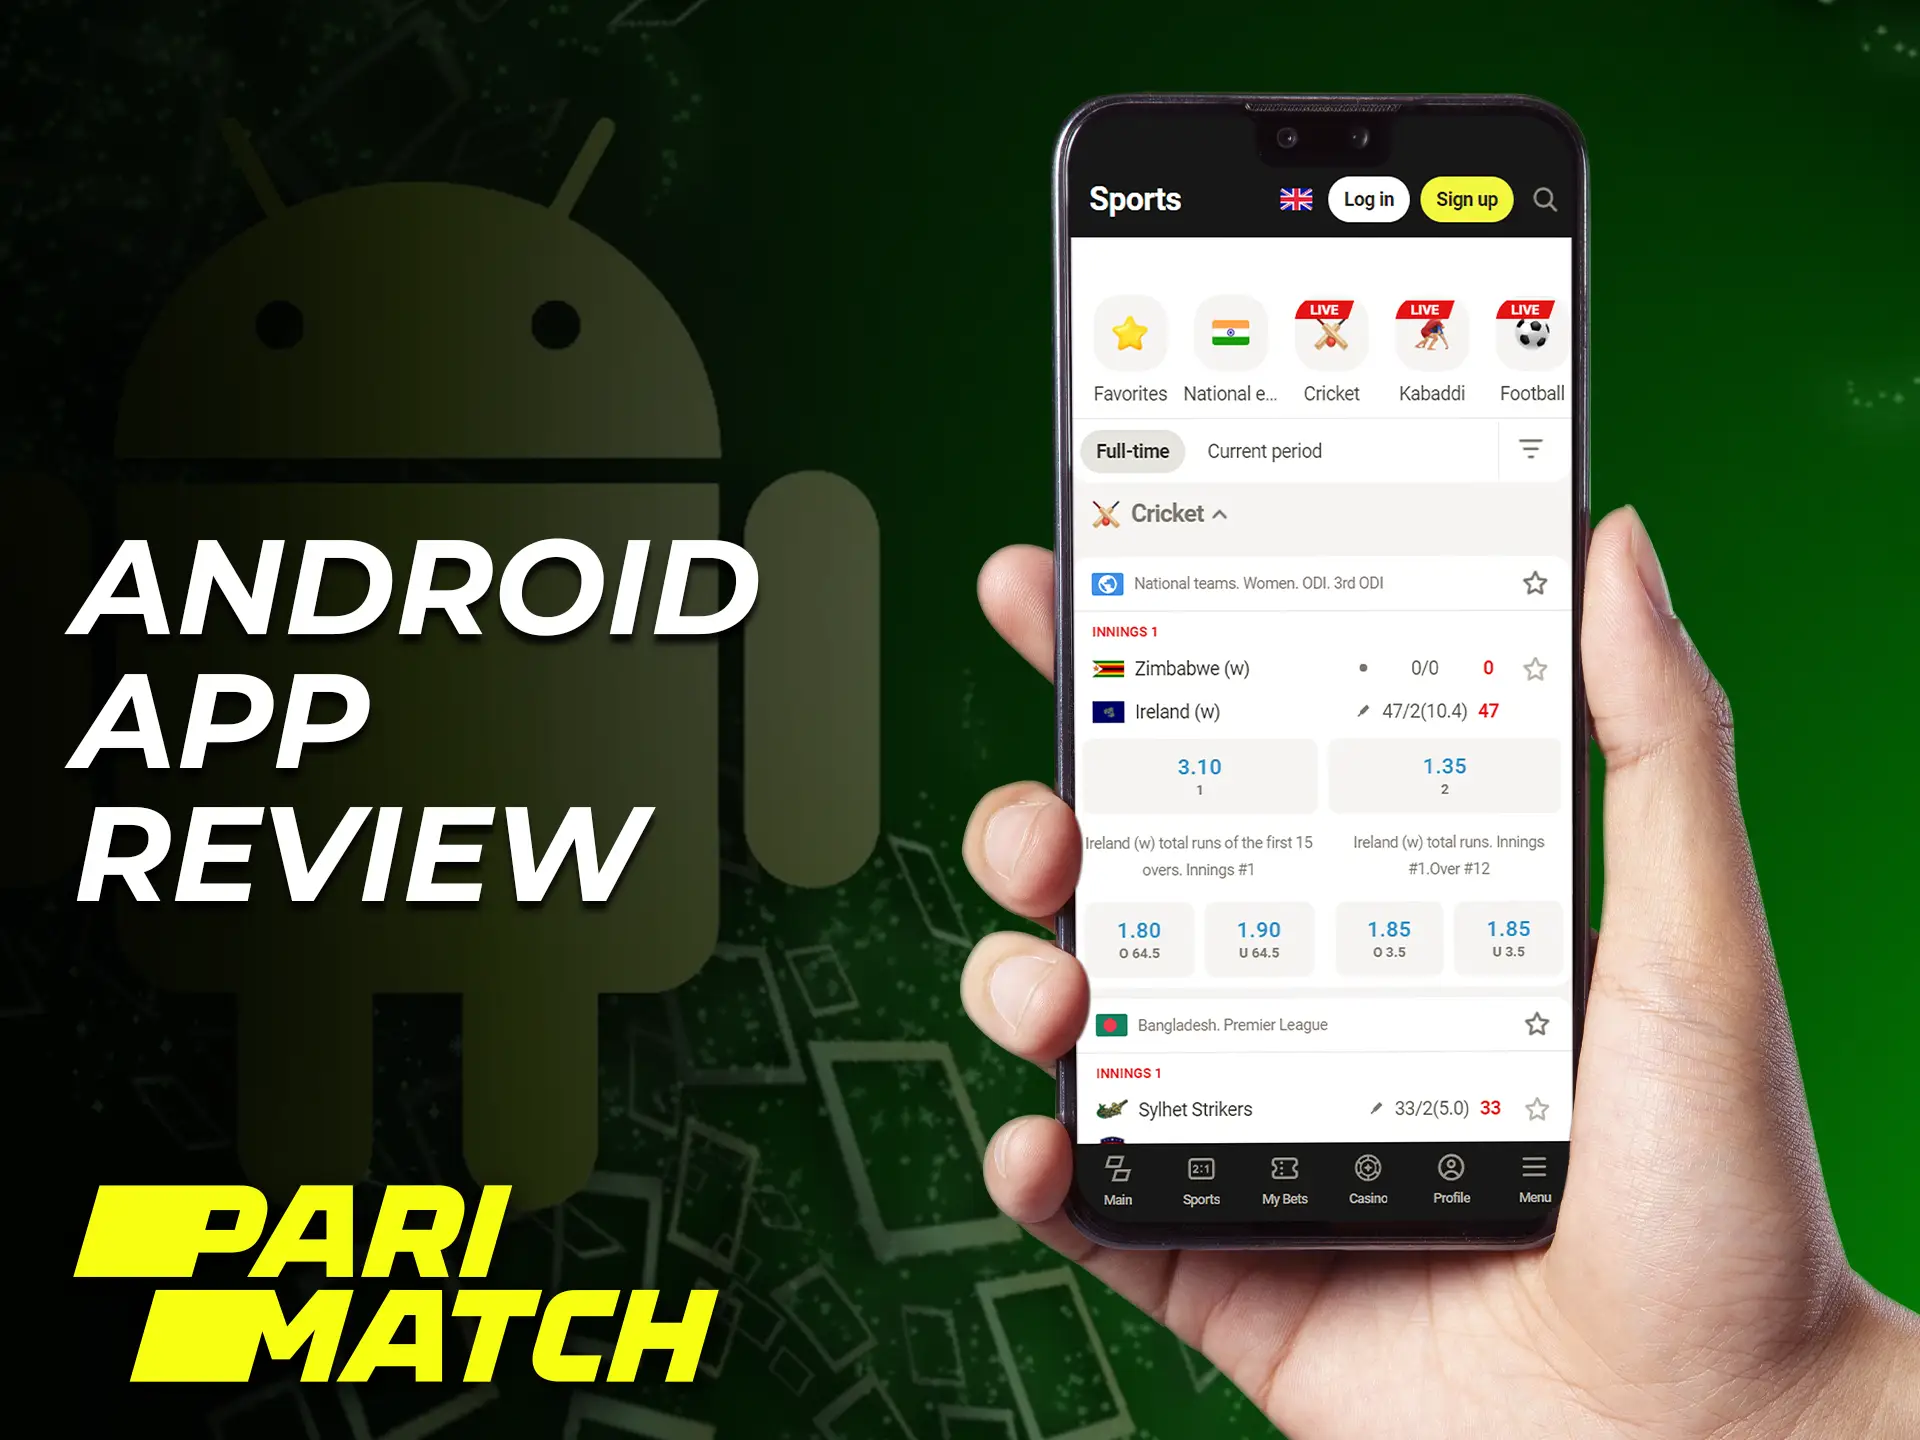 The Parimatch app for Android has full access to real money betting and casino games.